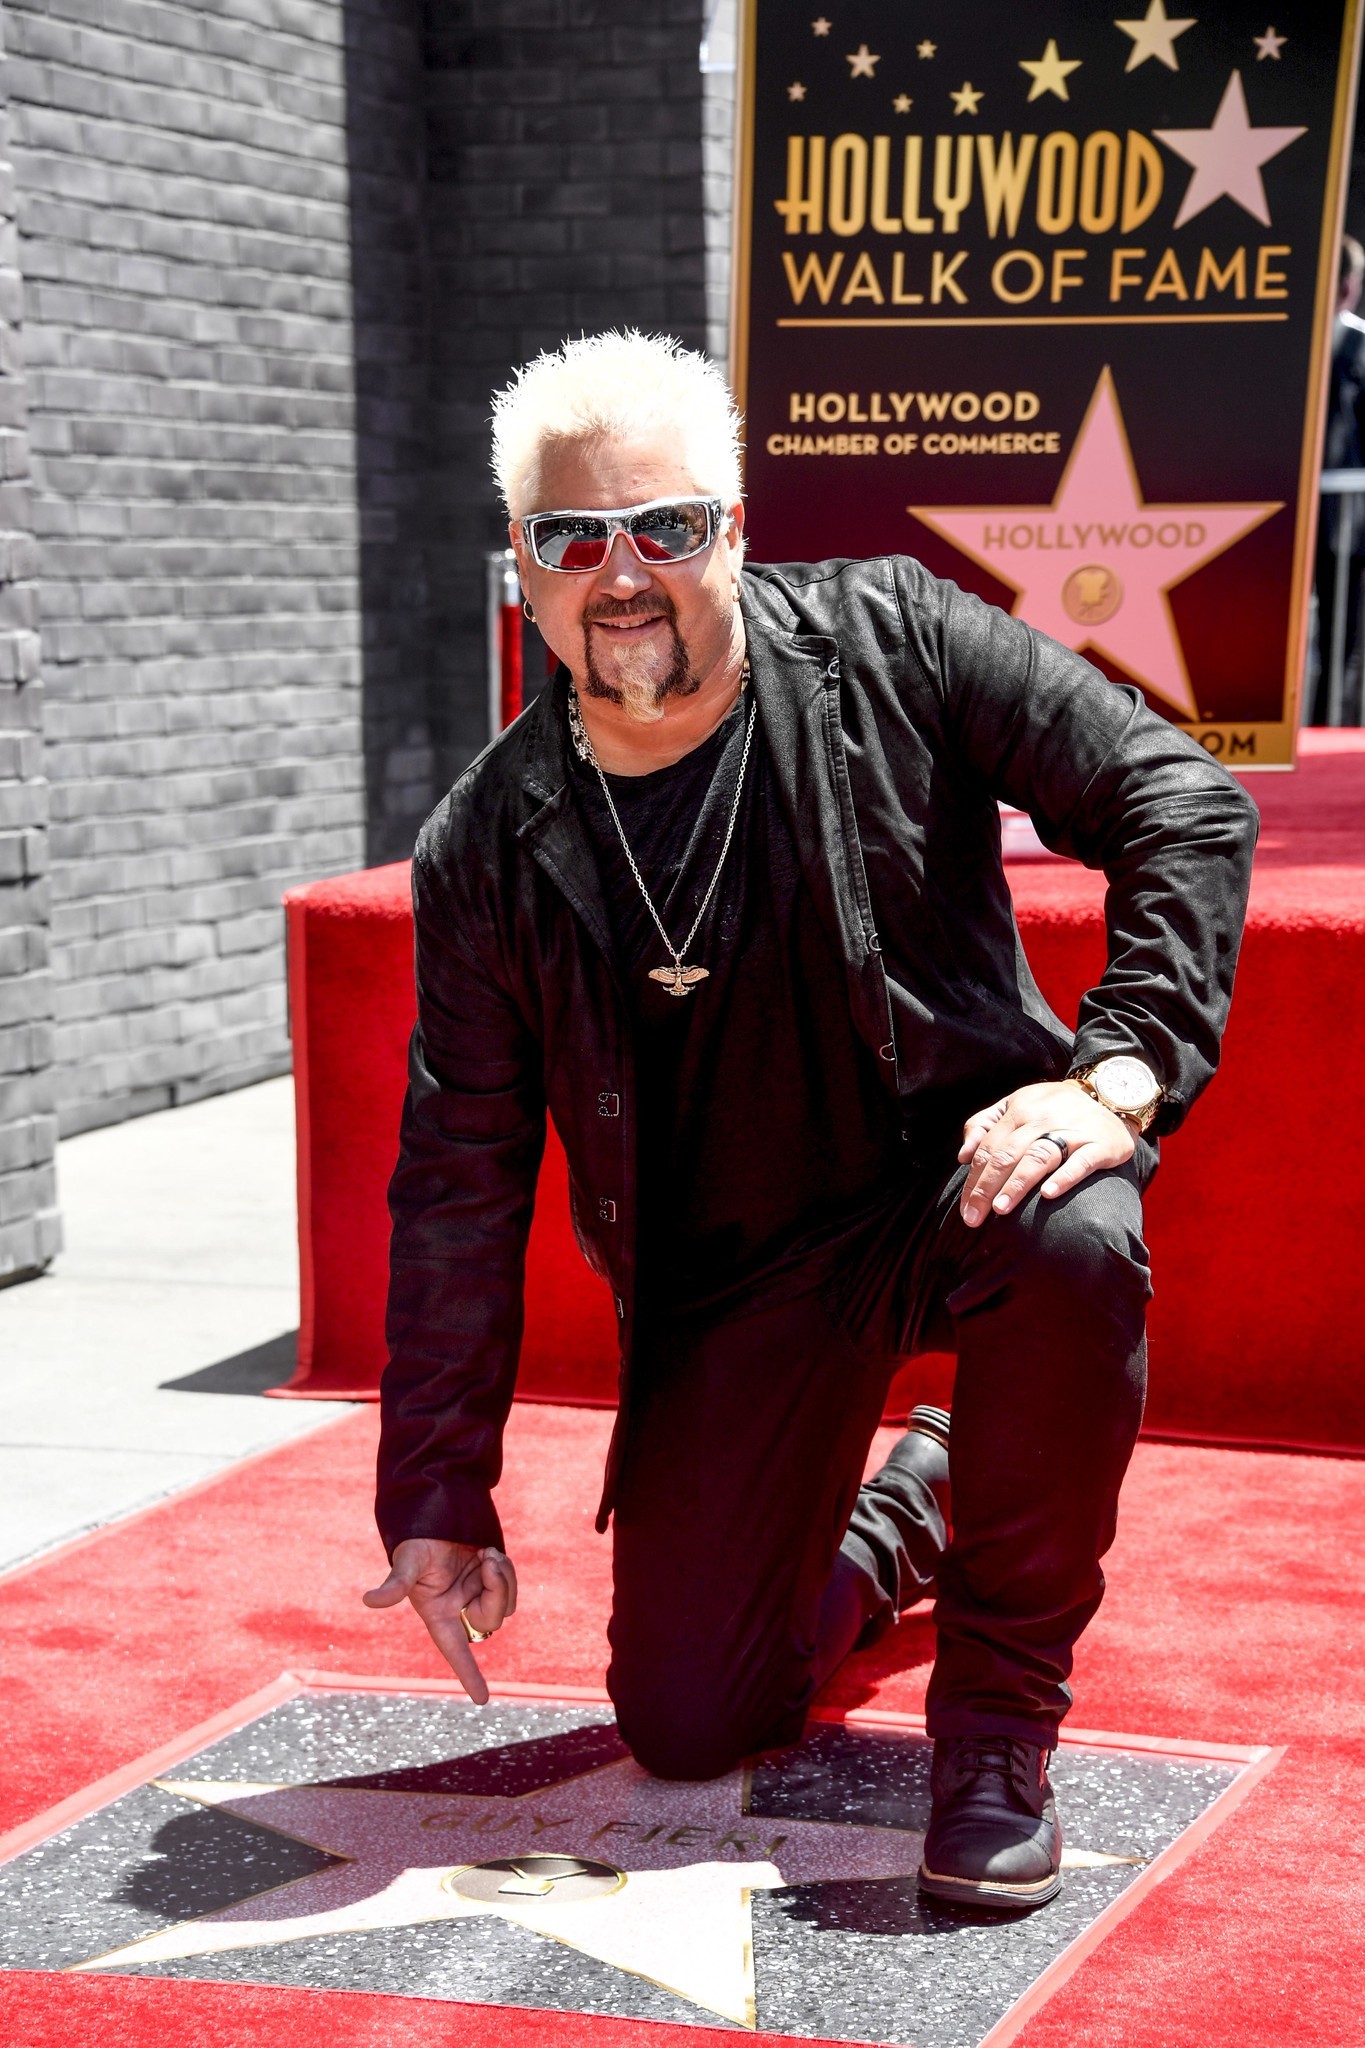 Chef Guy Fieri was honored with his own star on the Hollywood Walk of Fame in Hollywood, California on Wednesday, May 22, 2019.